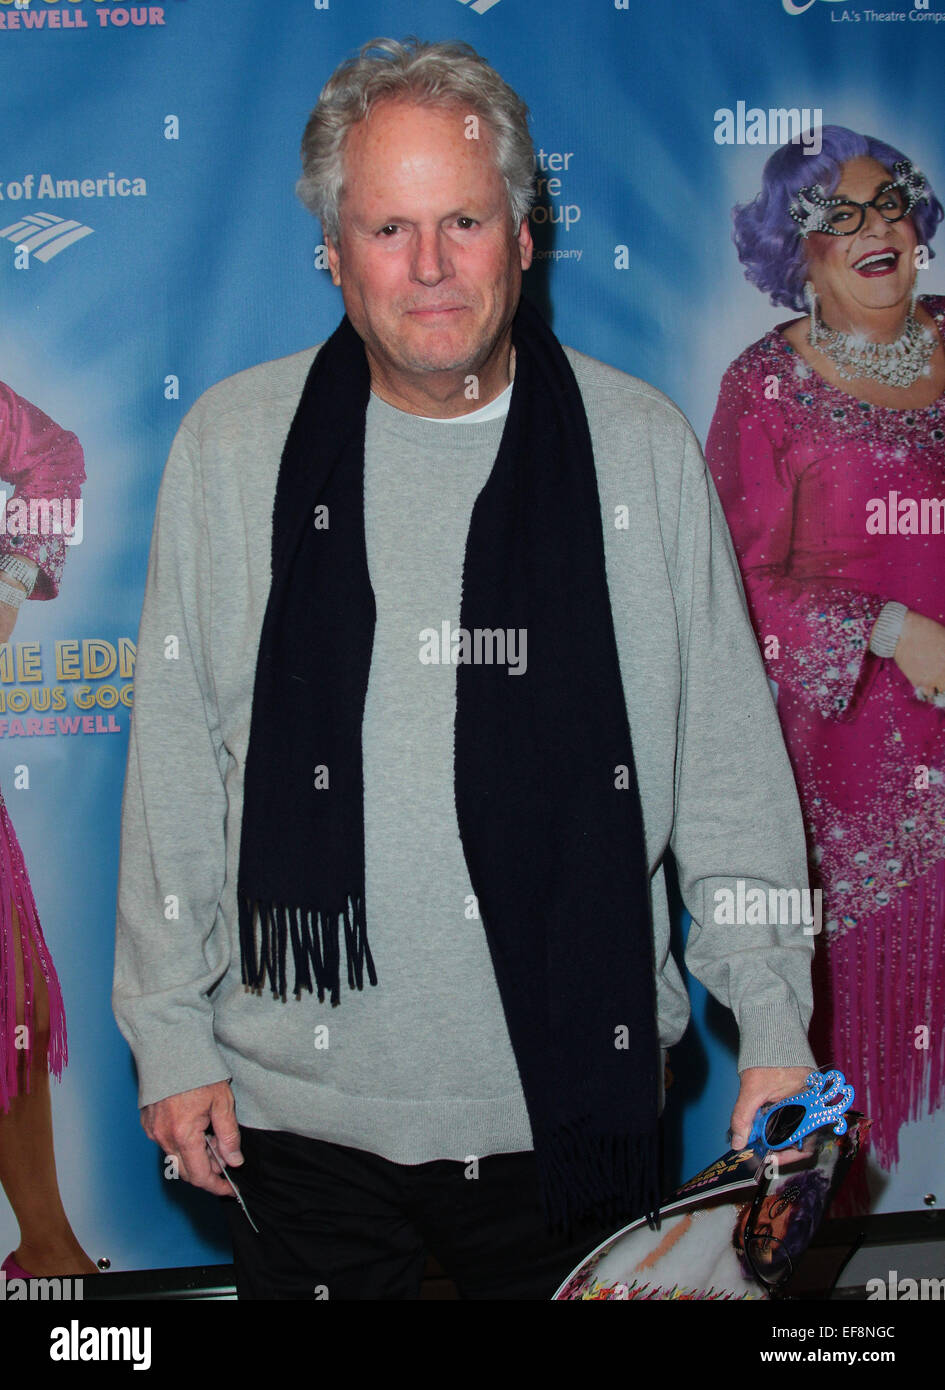 Los Angeles, California, USA. 28th Jan, 2015. Cliff DeYoung attends 'Dame Edna's Glorious Goodbye ''“ The Farewell Tour'' - opening night held at The Ahmanson Theatre on January 28th. 2015 in Los Angeles, California. USA. Credit:  TLeopold/Globe Photos/ZUMA Wire/Alamy Live News Stock Photo